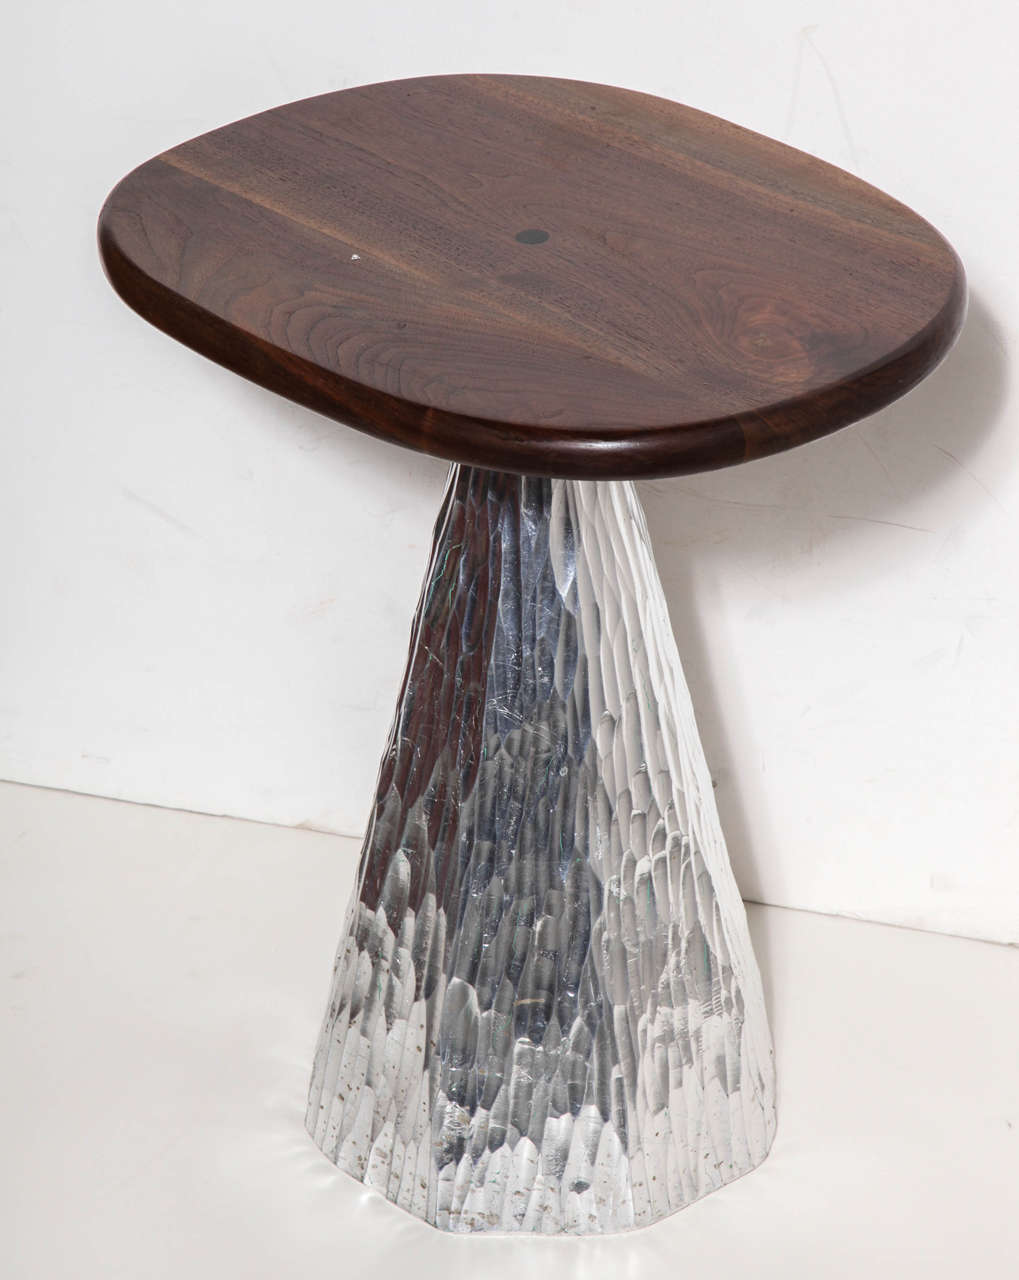 Phil Powell 2007 produced Occassional Table in lacquered Walnut with ebony button inlay on an ovoid Top and seated on a carved, chiseled triangular wooden base accentuated with Silver Leaf